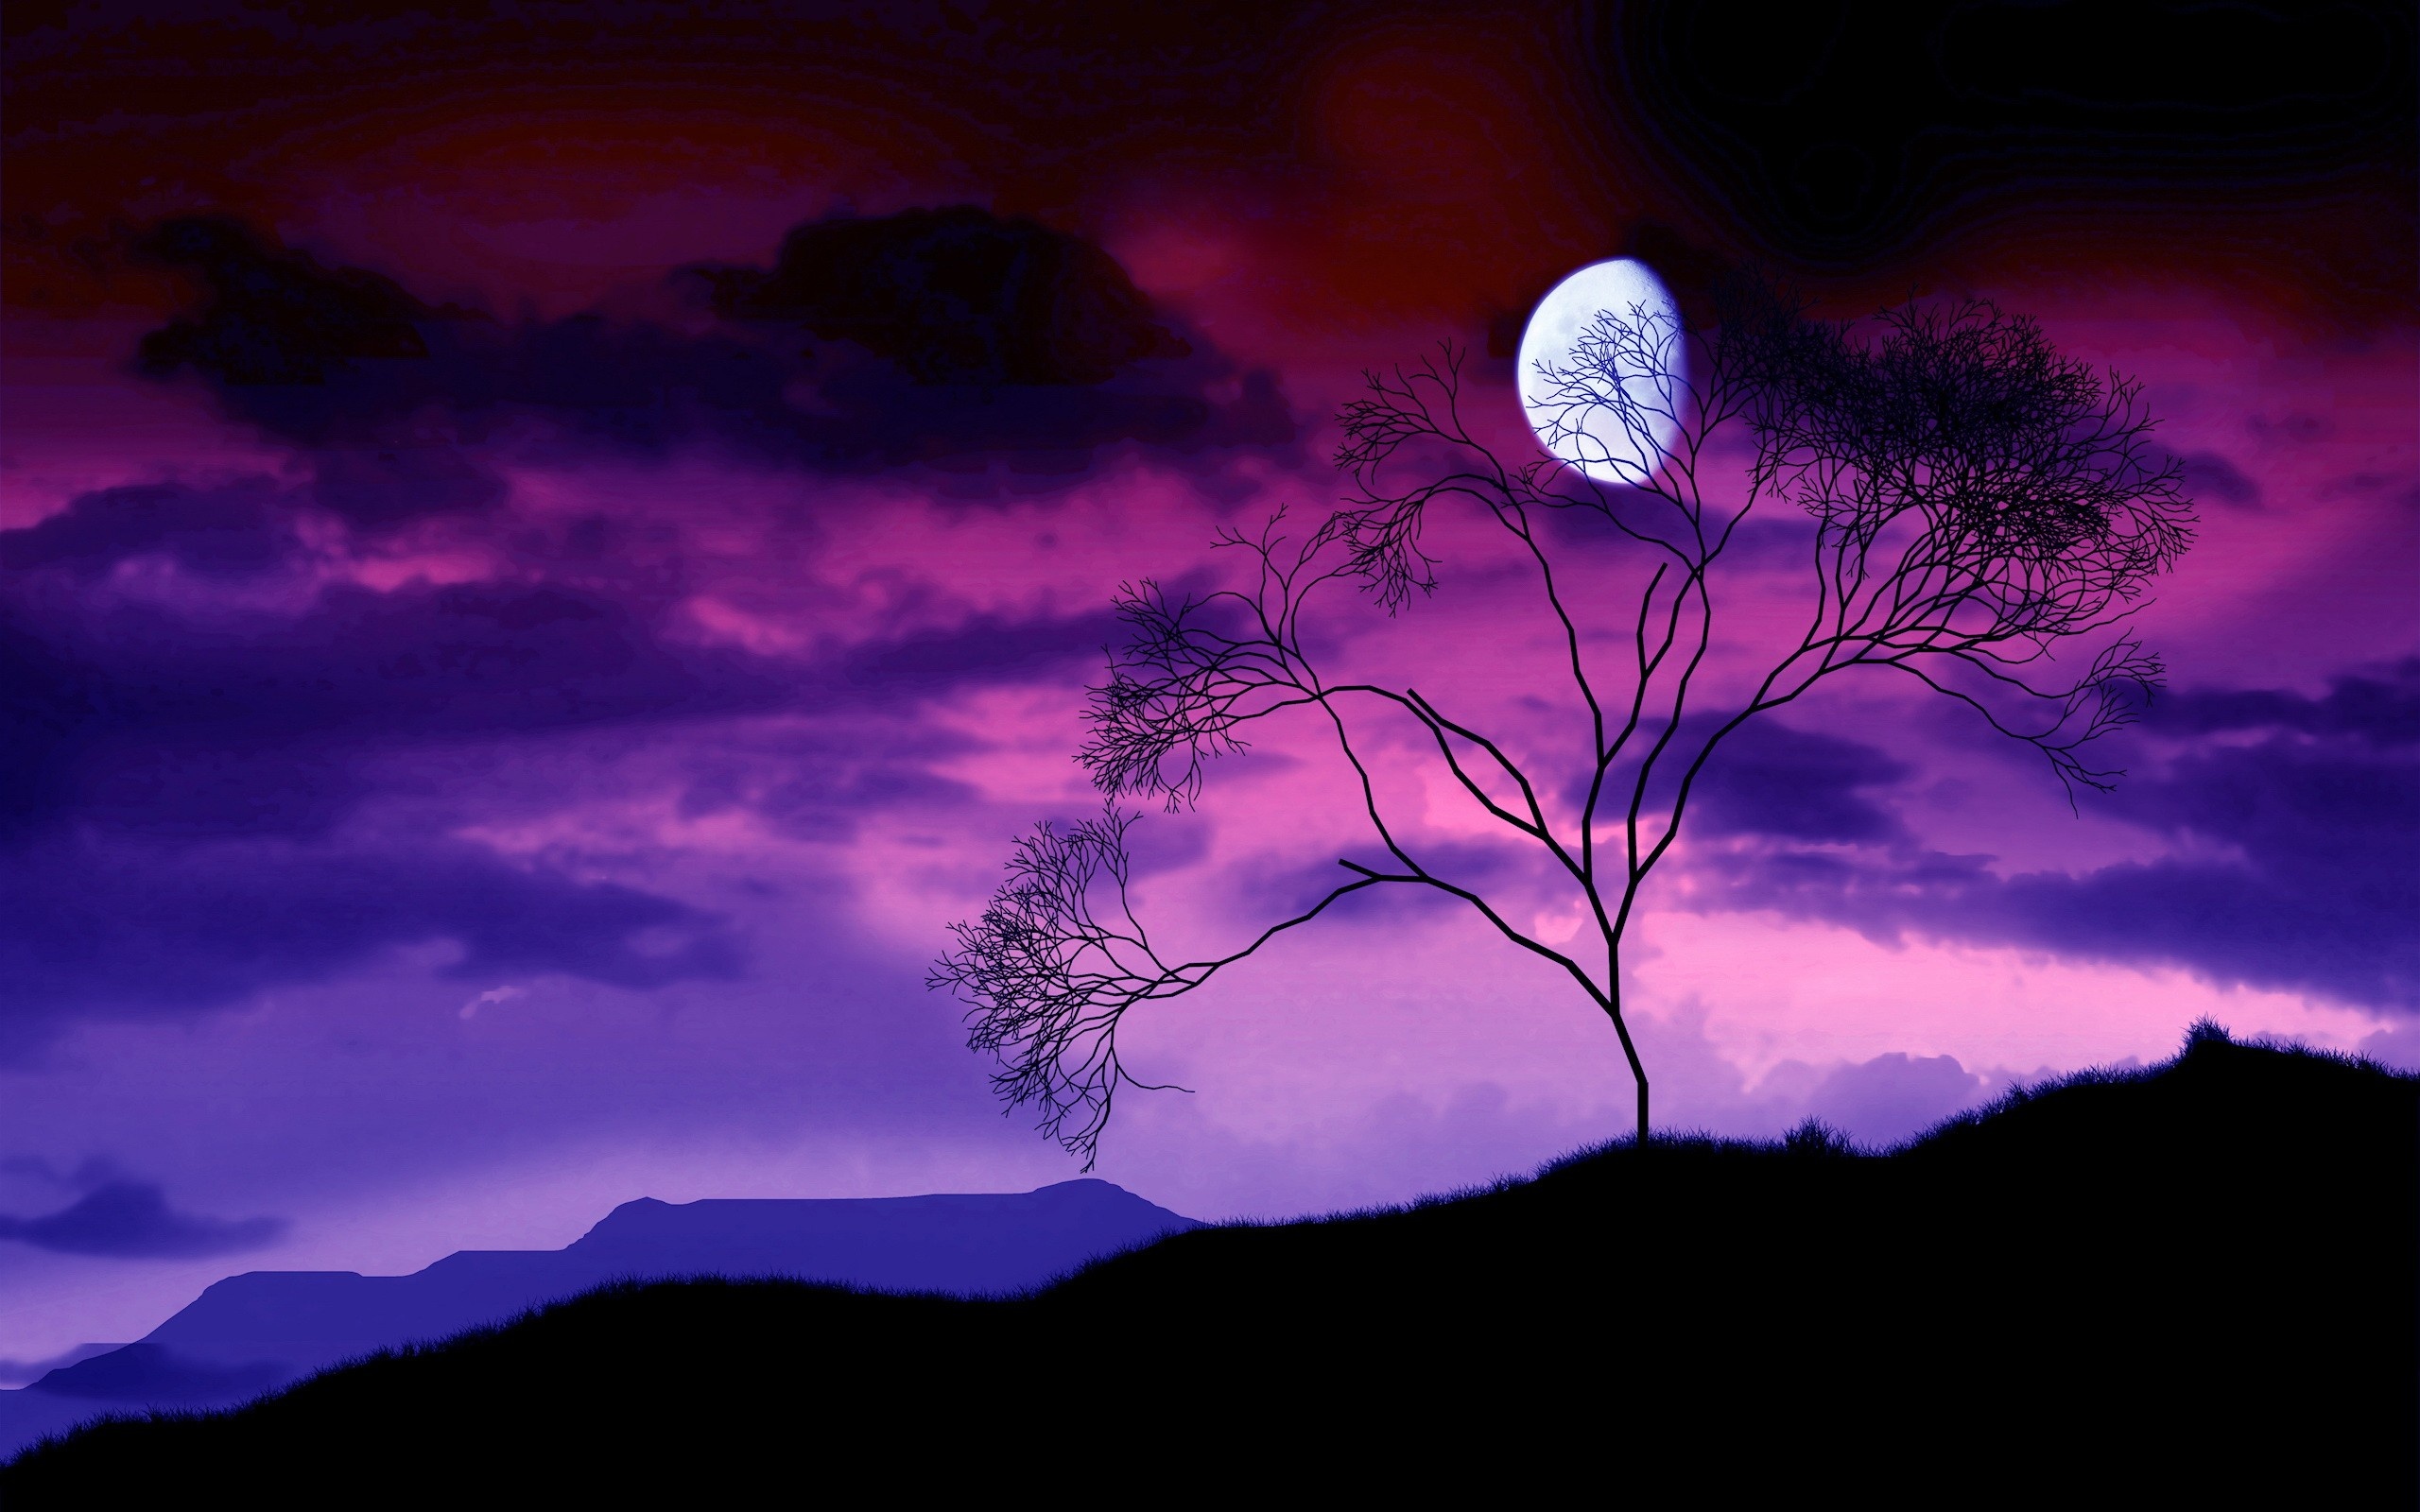 Download wallpaper for 1280x800 resolution | Tree branches, the moon at  night, purple sky | nature and landscape | Wallpaper Better